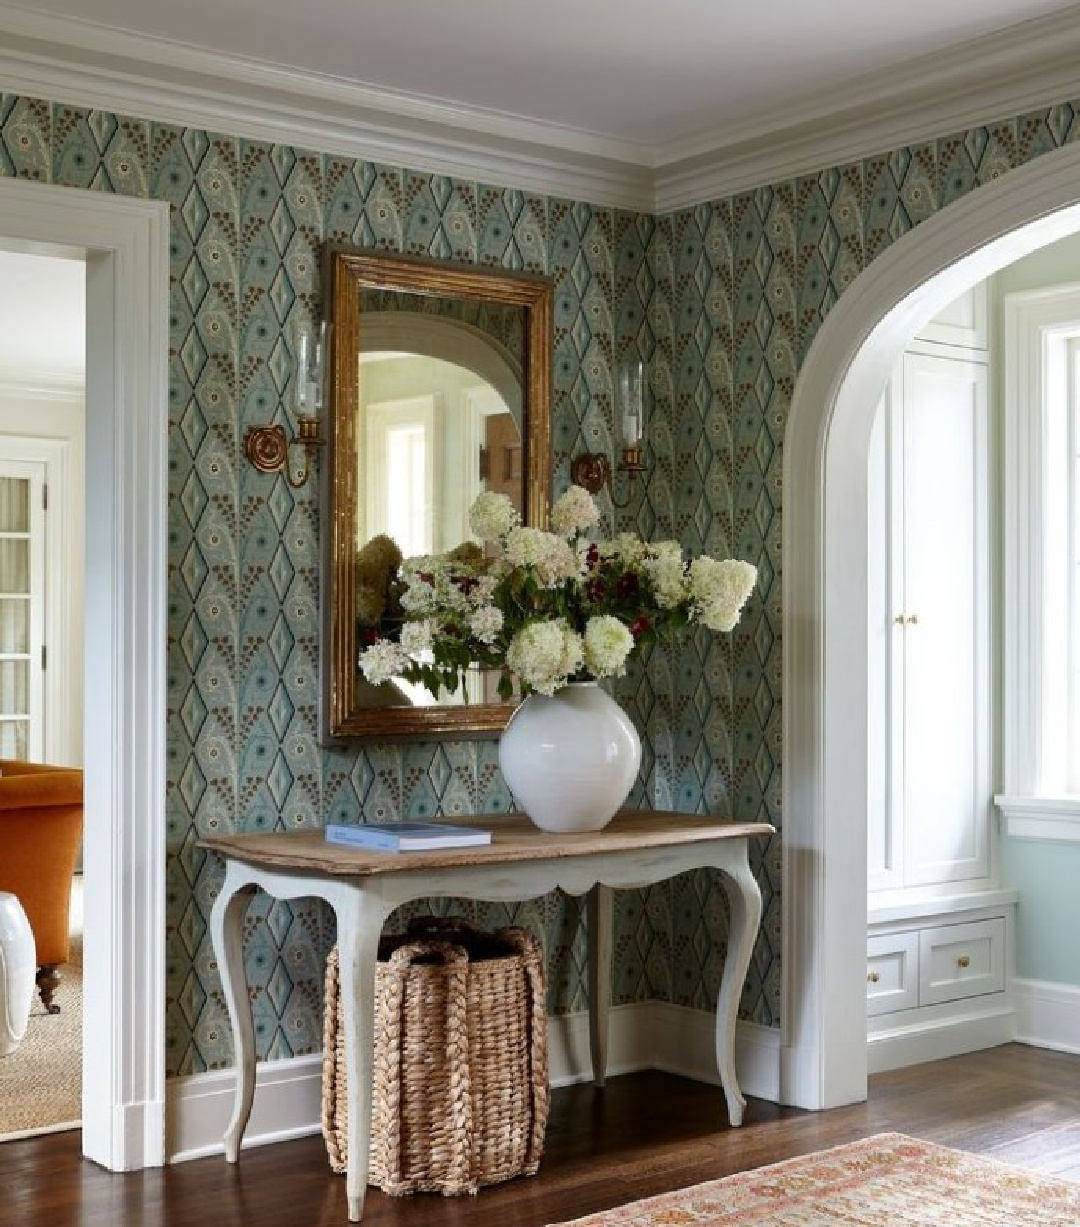 Traditional and timeless entry with console table and mirror - @mcgrath2. #timelessinterior #traditionalstyle